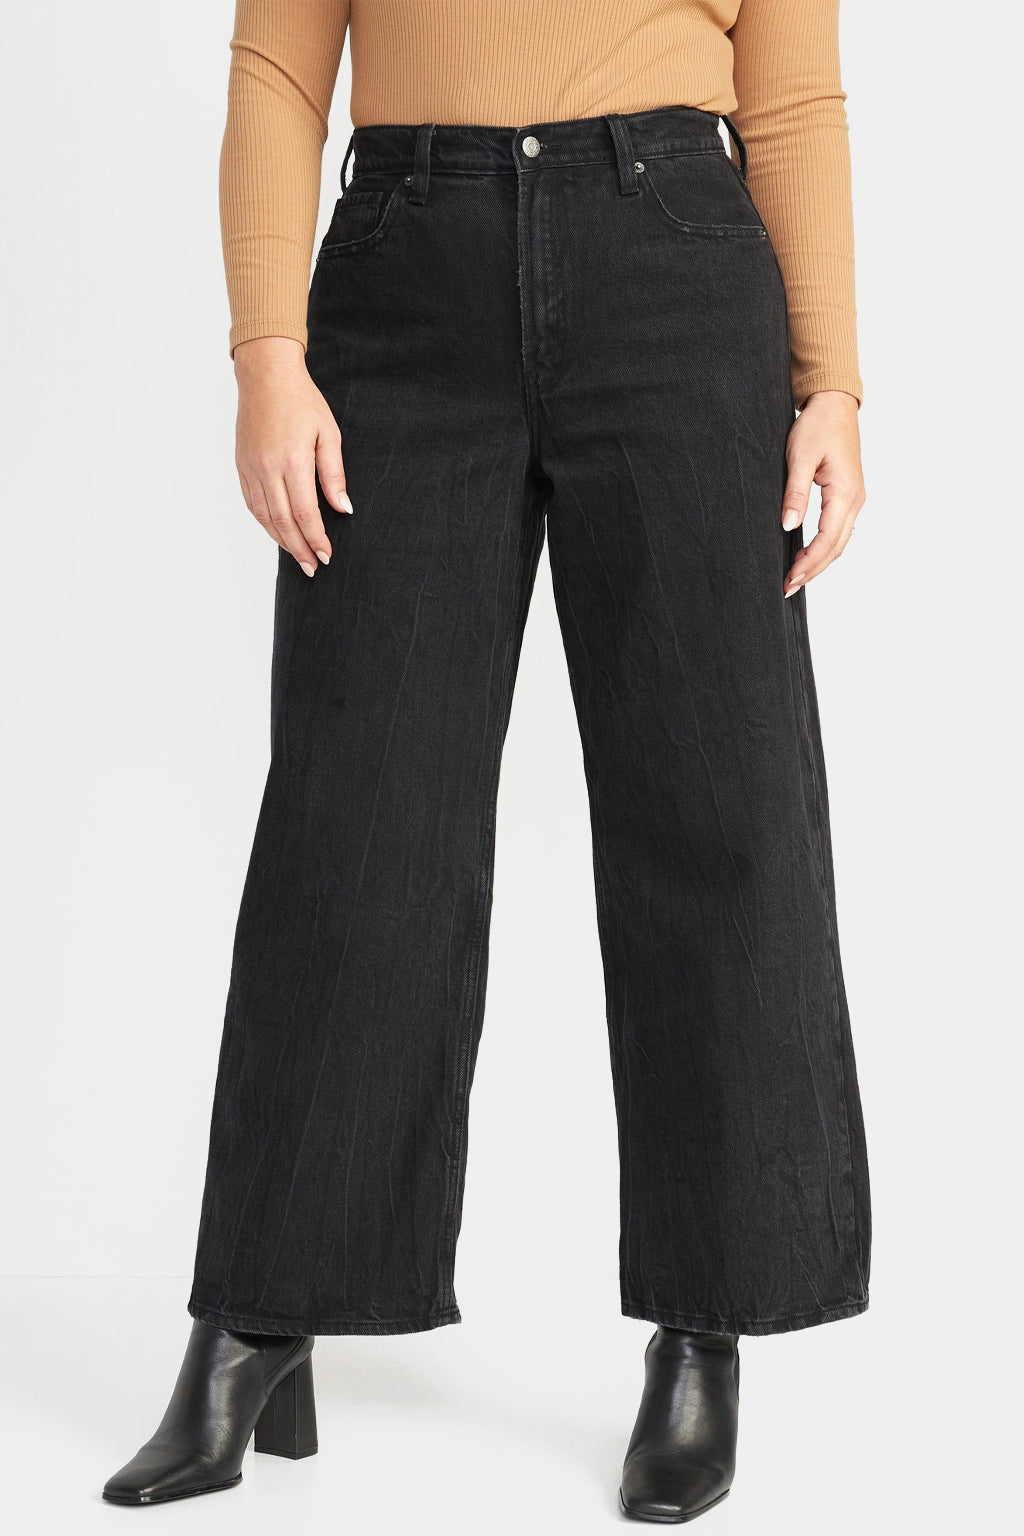 Old Navy - Extra High-Waisted Baggy Wide-Leg Non-Stretch Jeans for Women